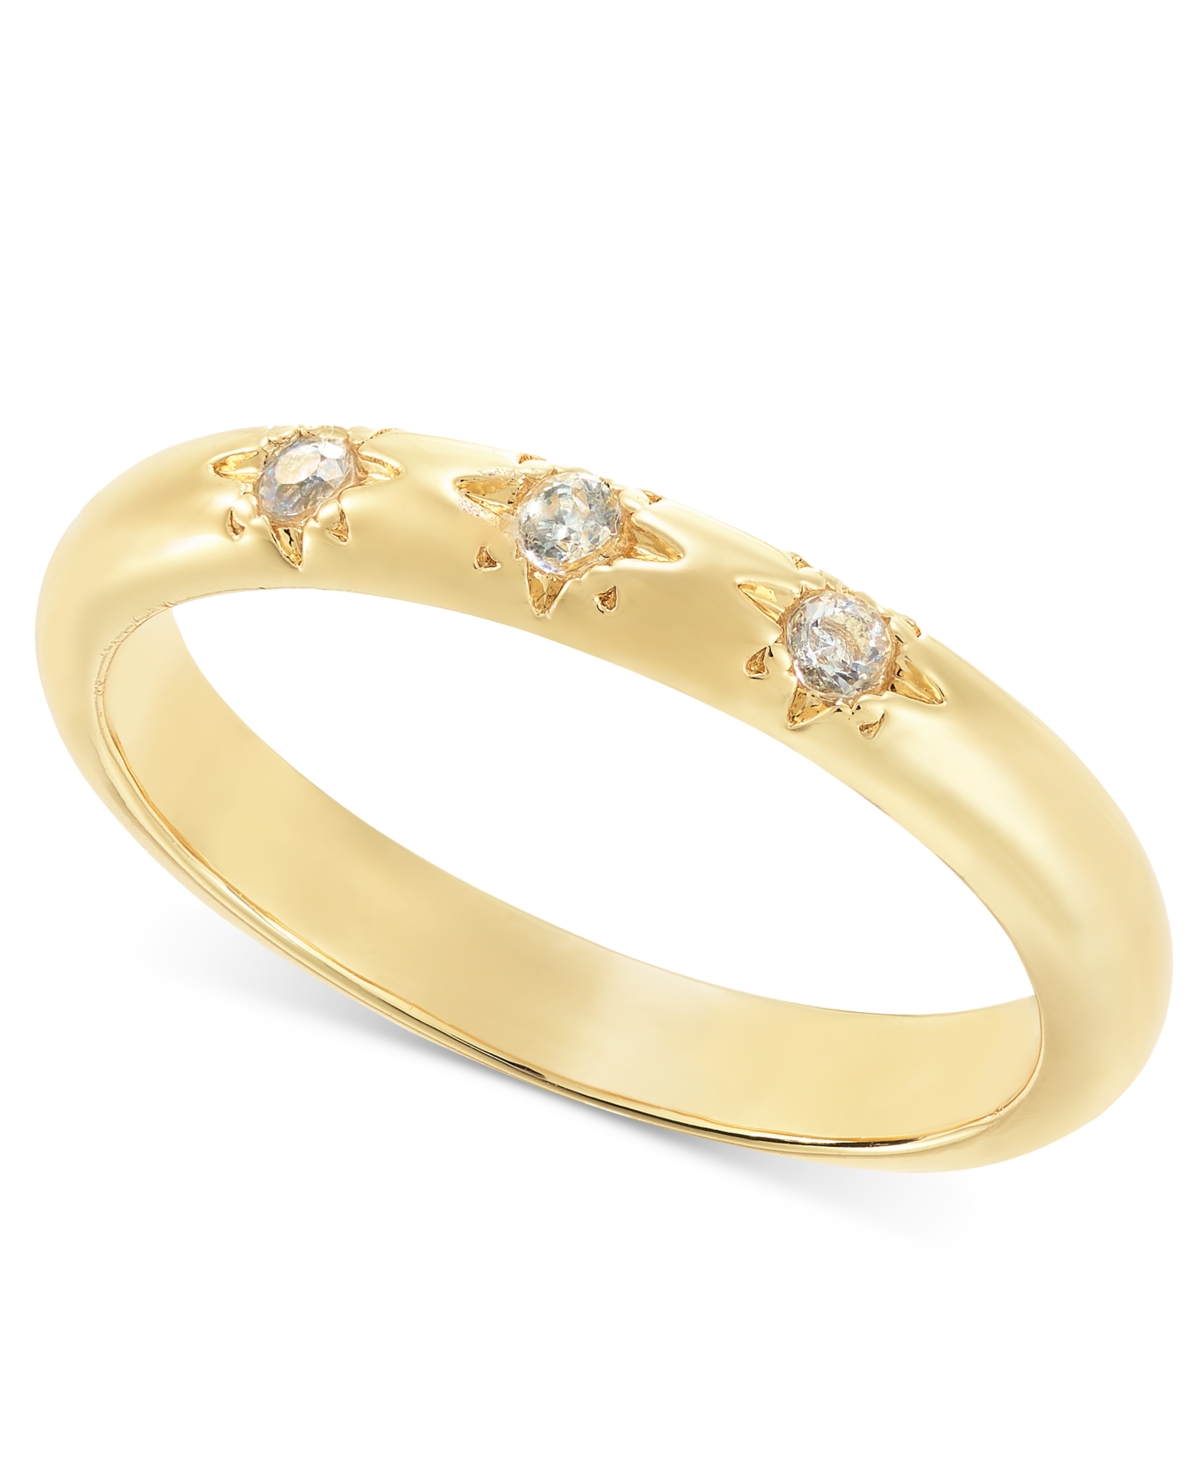 Gold-Tone Crystal Band Ring, Created for Macy's - Gold